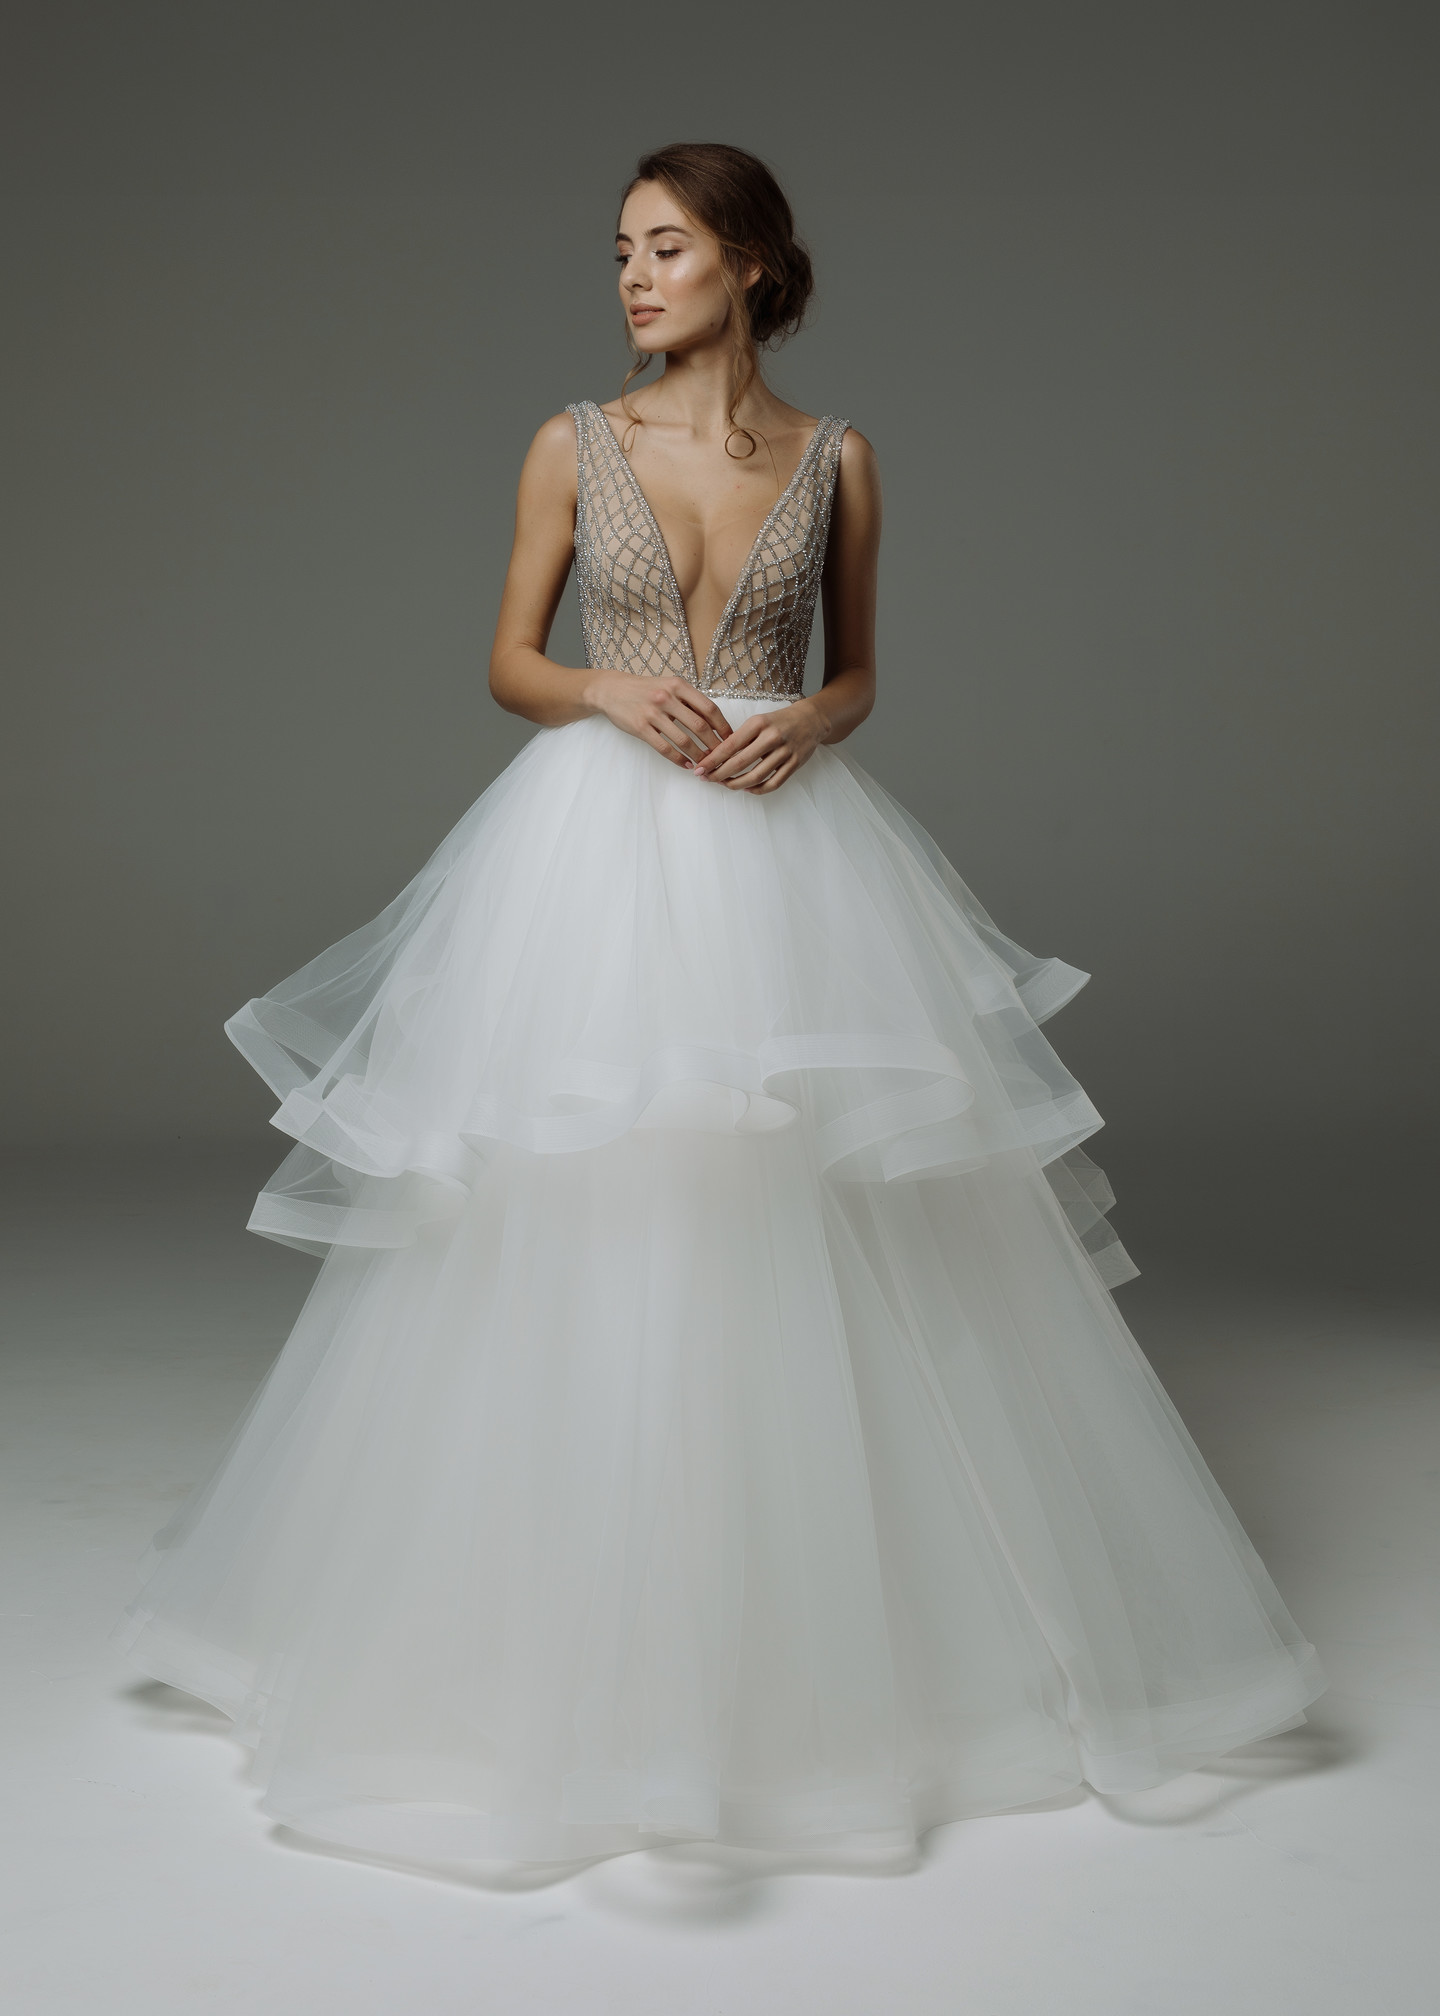 Marian gown, 2019, couture, dress, bridal, off-white, tulle, embroidery, train, A-line, archive